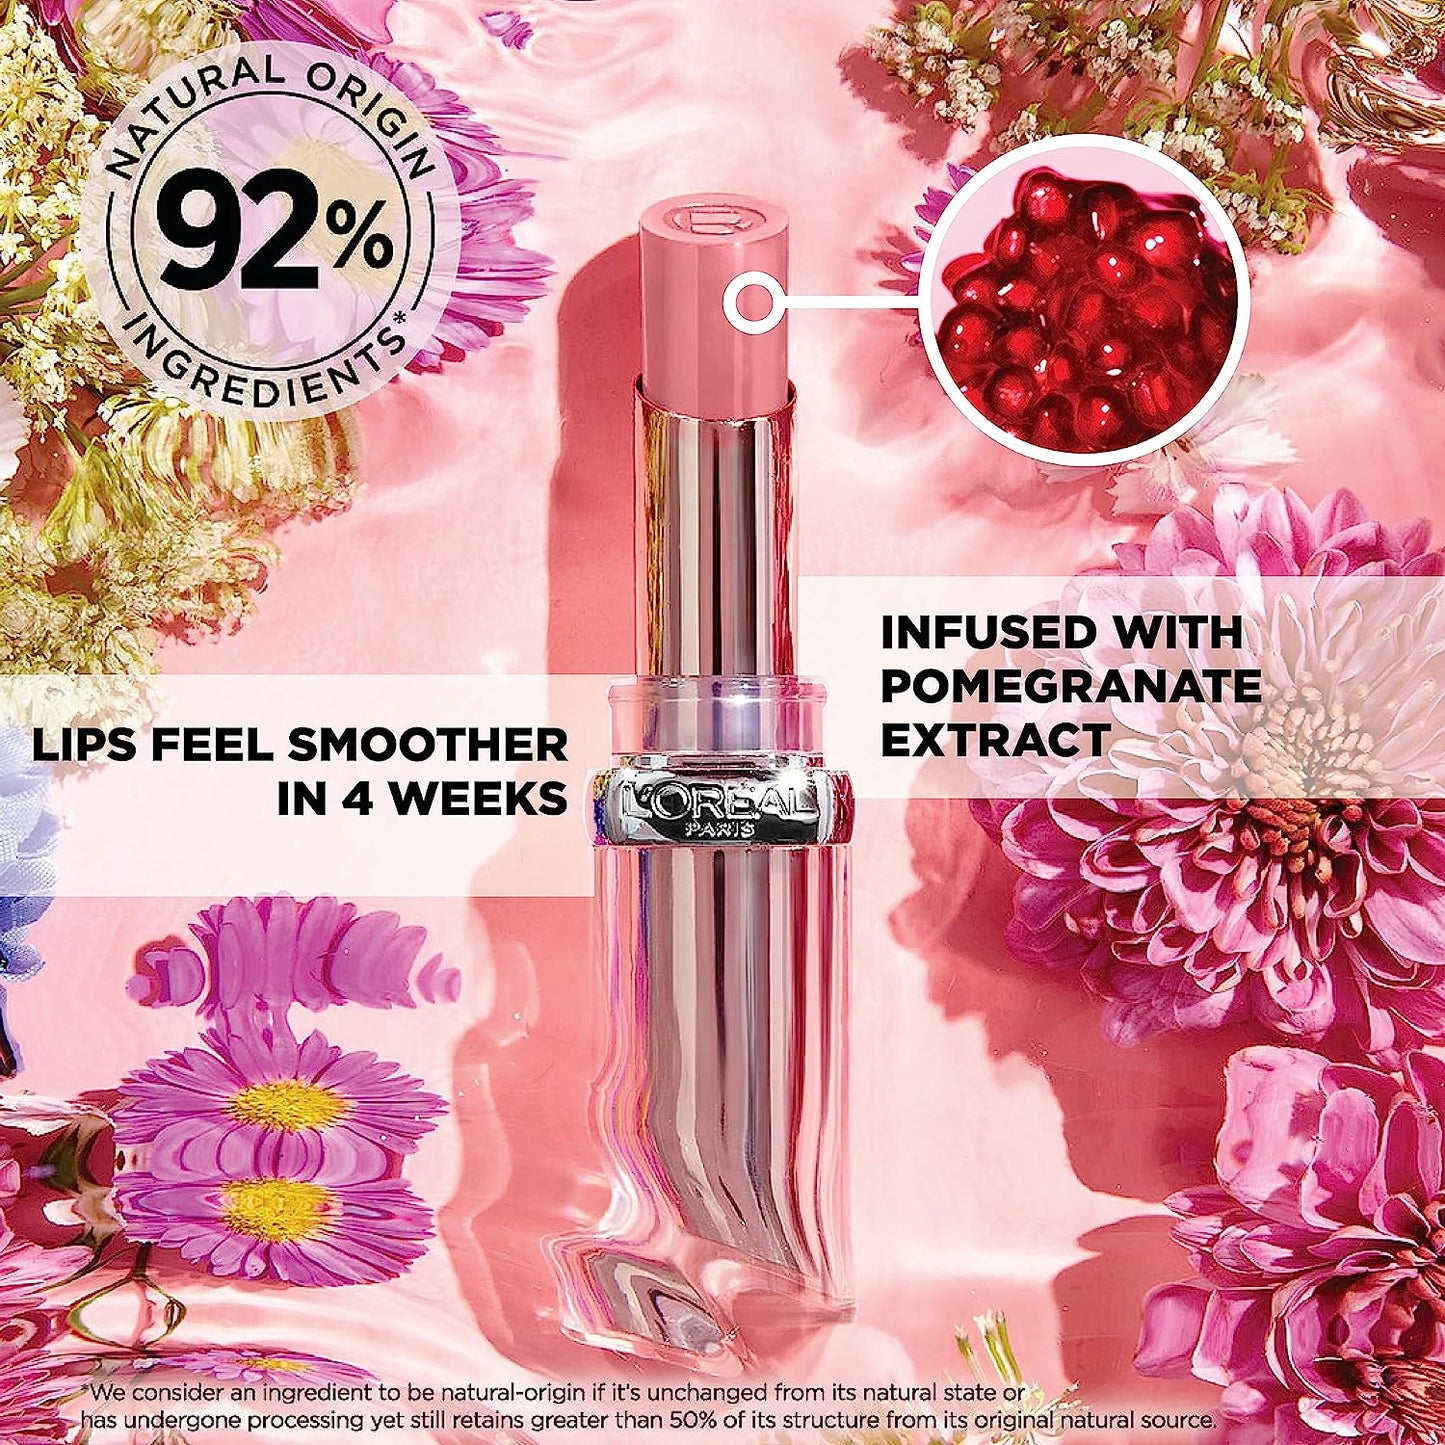 L'Oréal Glow Paradise Balm-In-Lipstick | 200 Mulberry Bliss